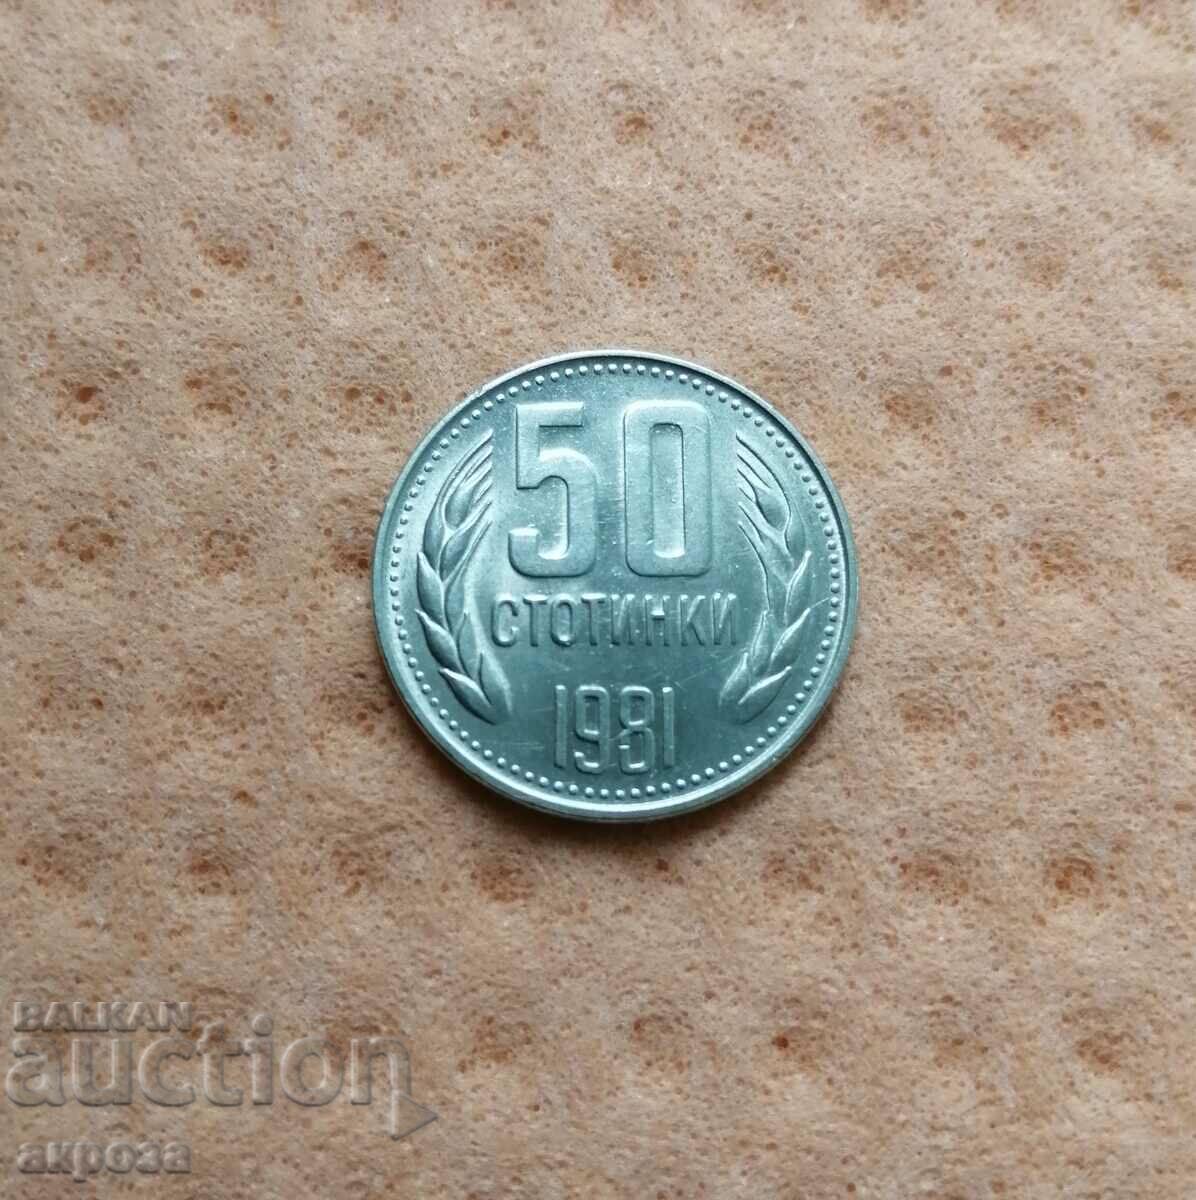 50 cents 1981 in quality